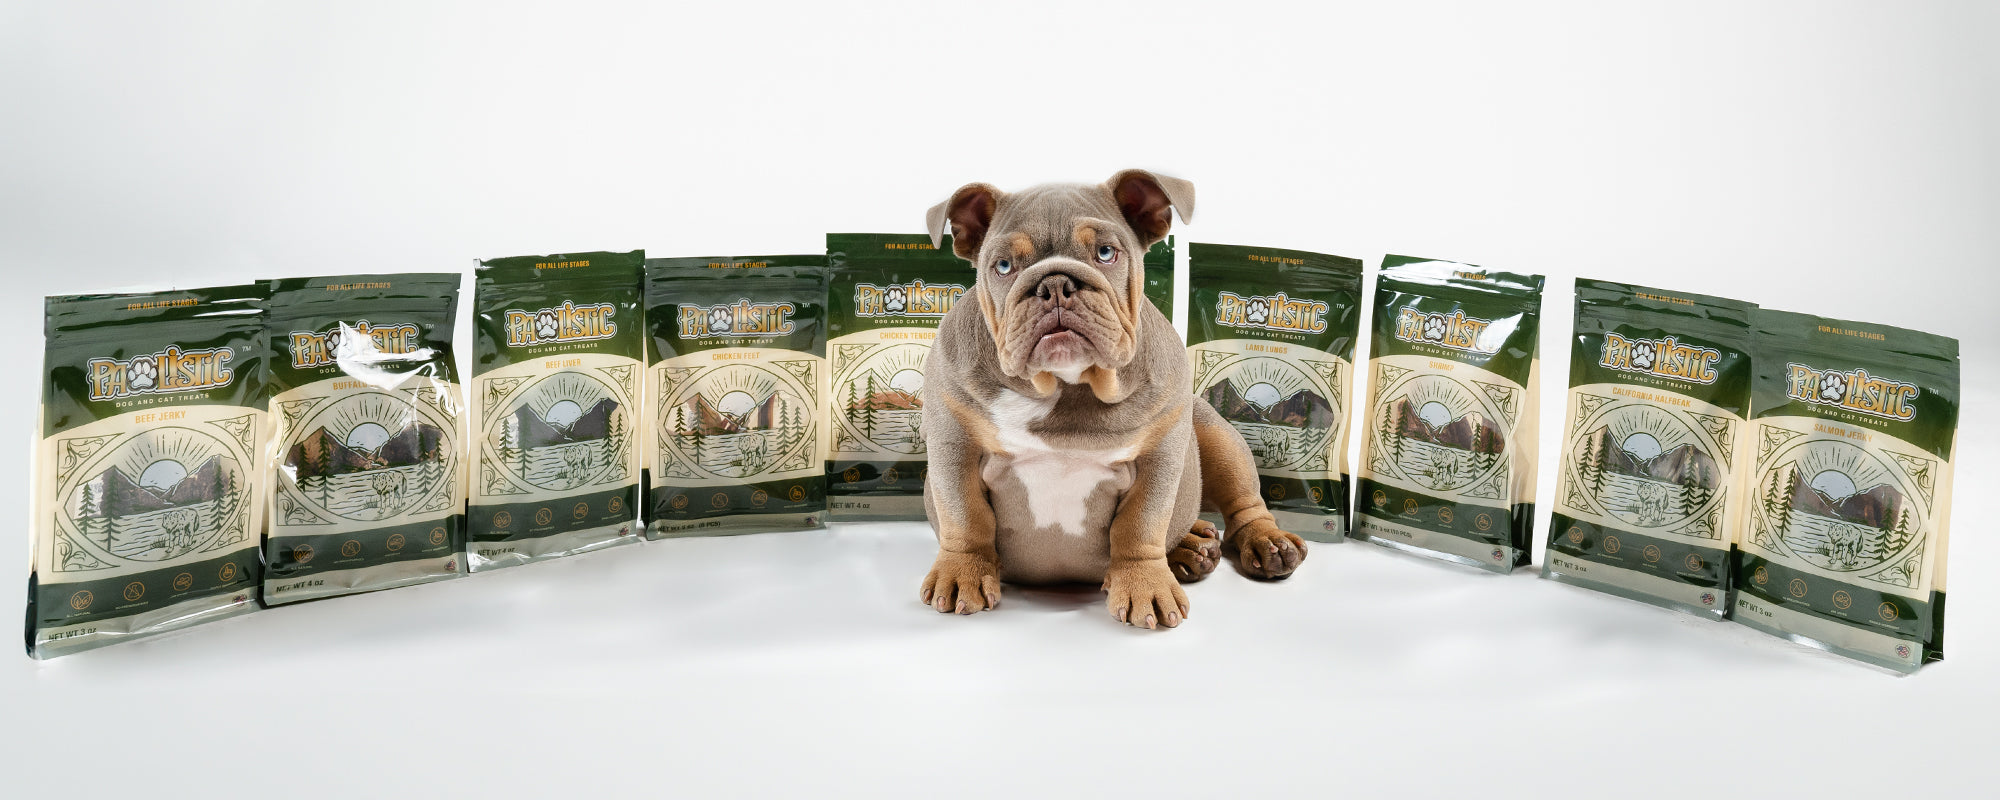 Adorable English Bulldog puppy surrounded by a variety of Pawlistic Treats, specially crafted for dogs in all life stages. Elevate your pet's delight and nutrition with our premium treats designed to complement every phase of their journey.